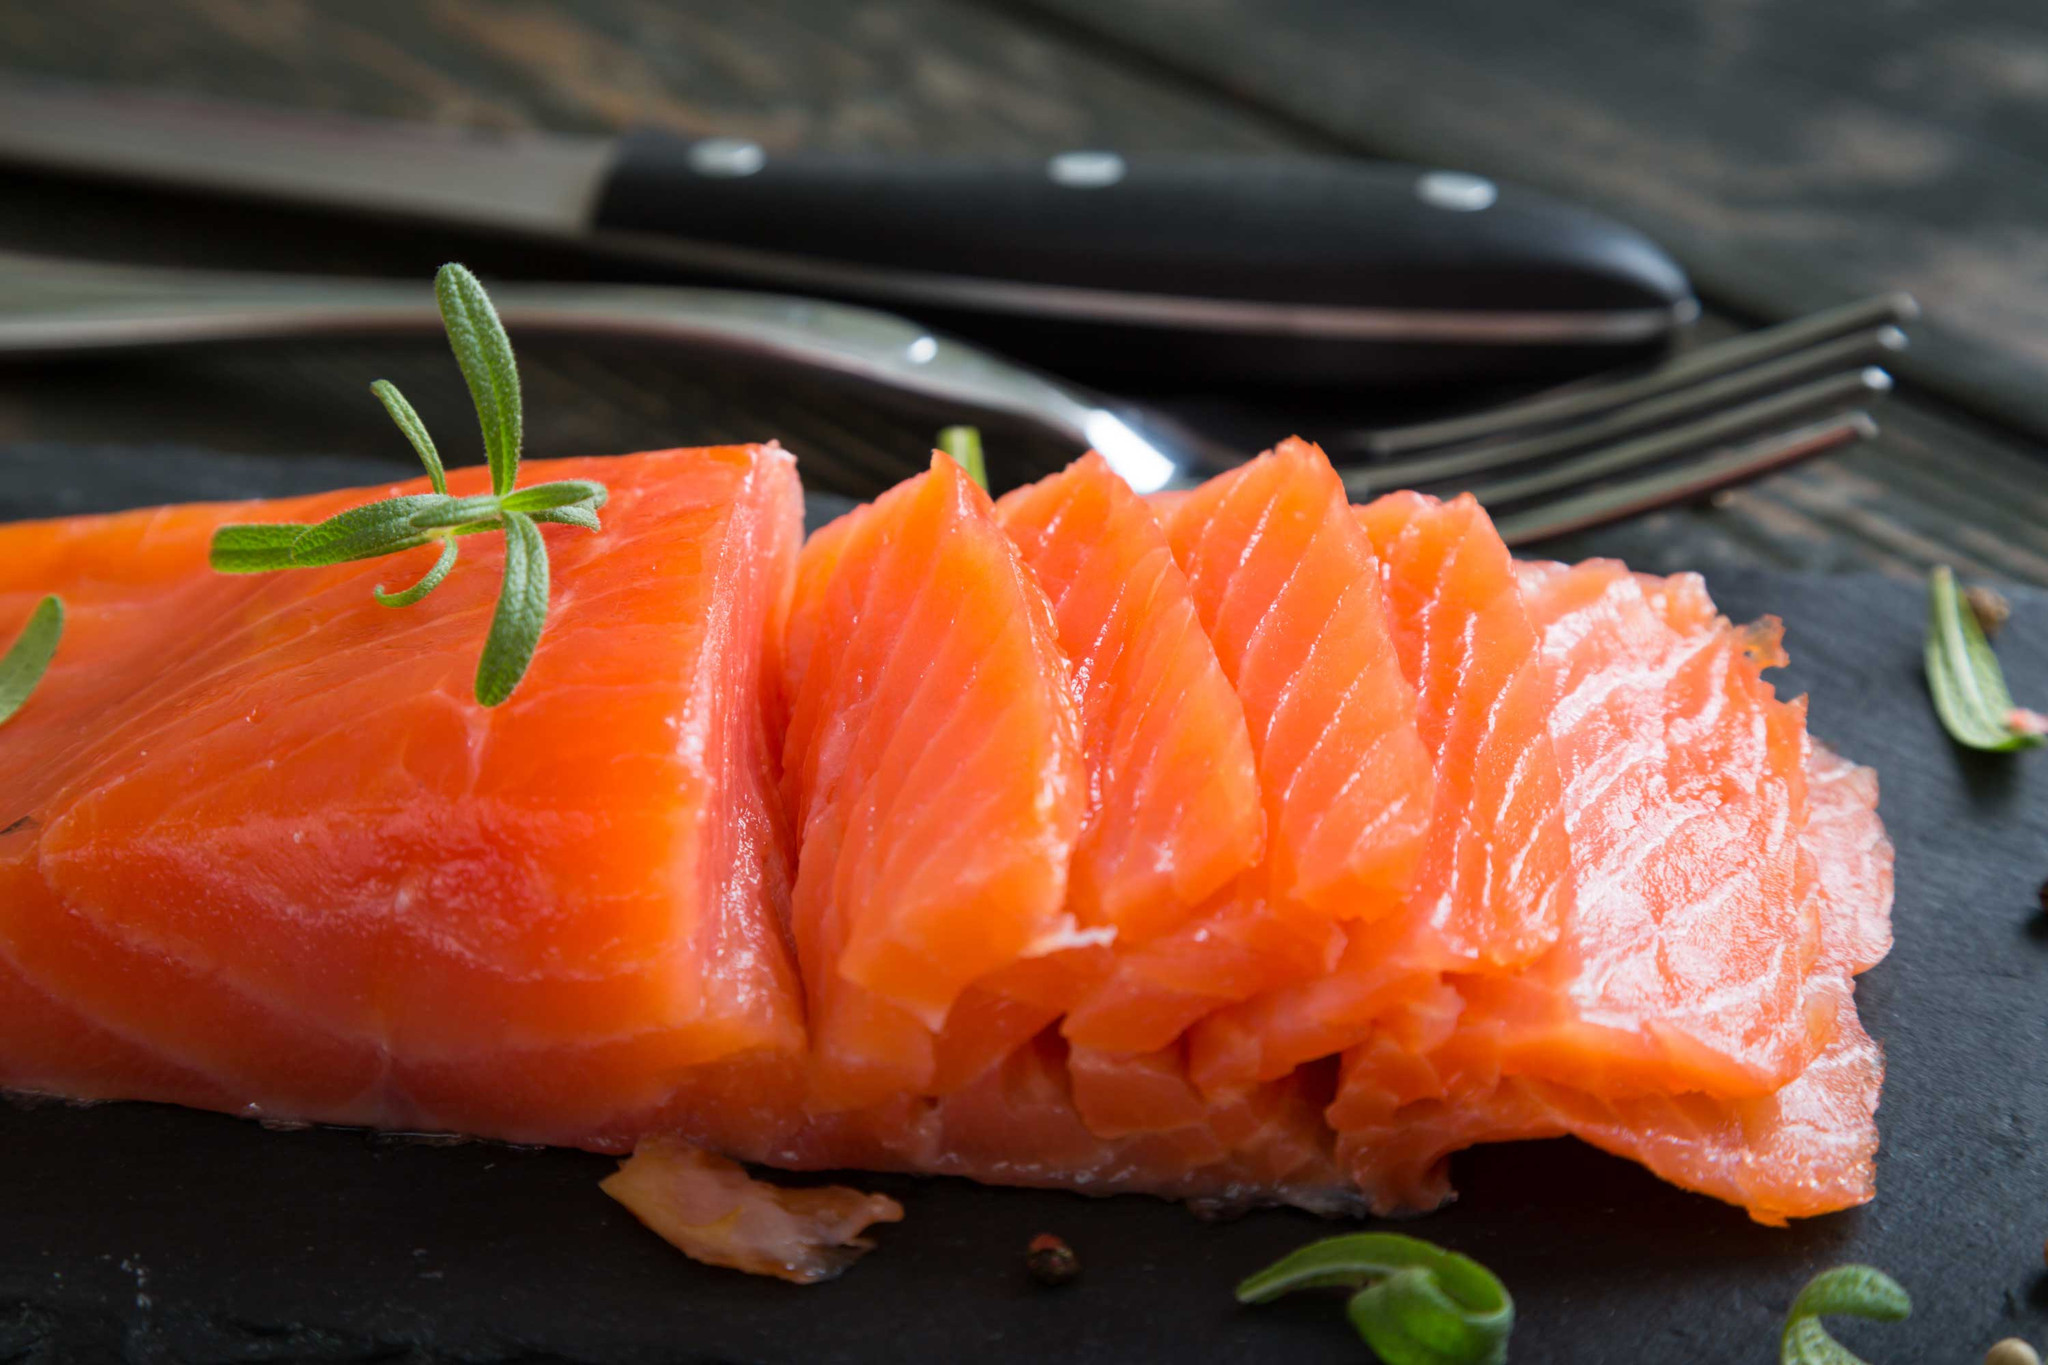 Tender Fish Meat, Cut into Thin Slices. Cold-smoked Chum Salmon Stock Image  - Image of siberian, market: 207601241